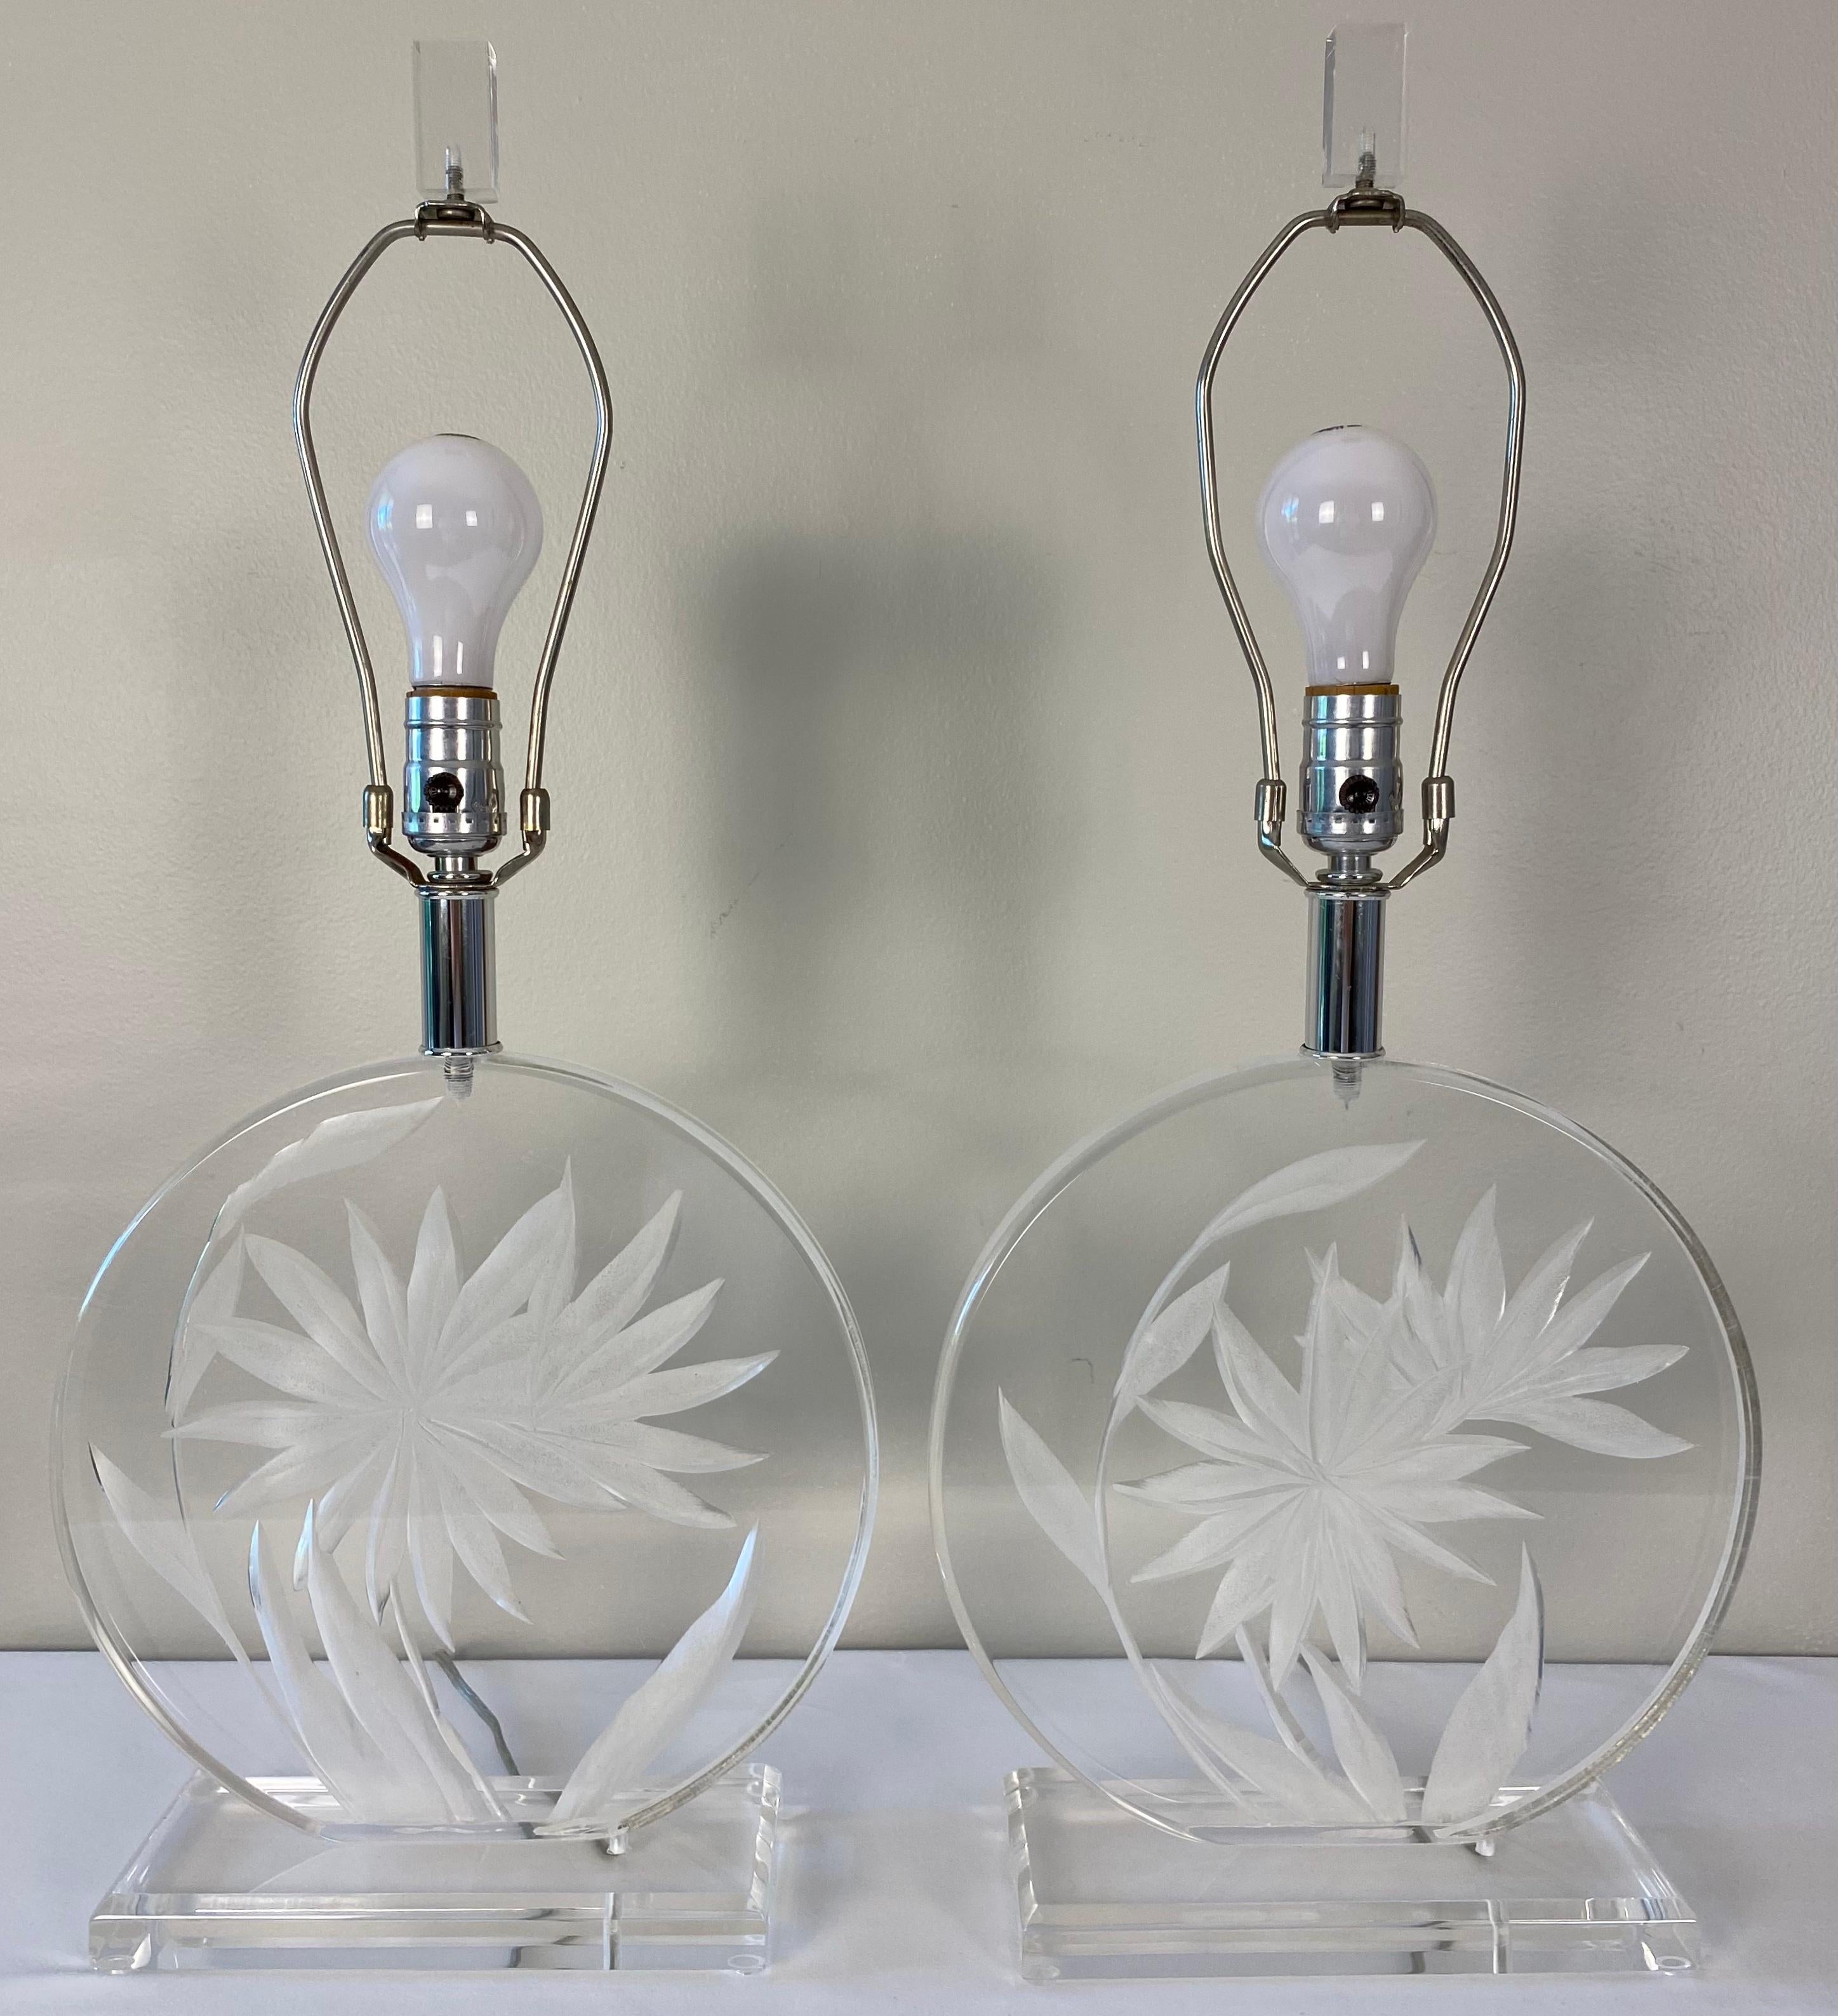 A very good quality pair of lucite table lamps attributed to Karl Springer. This stylish pair of lucite table lamps have an etched floral and leaf design making them more interesting and a perfect pair to display on your end tables, nightstands or